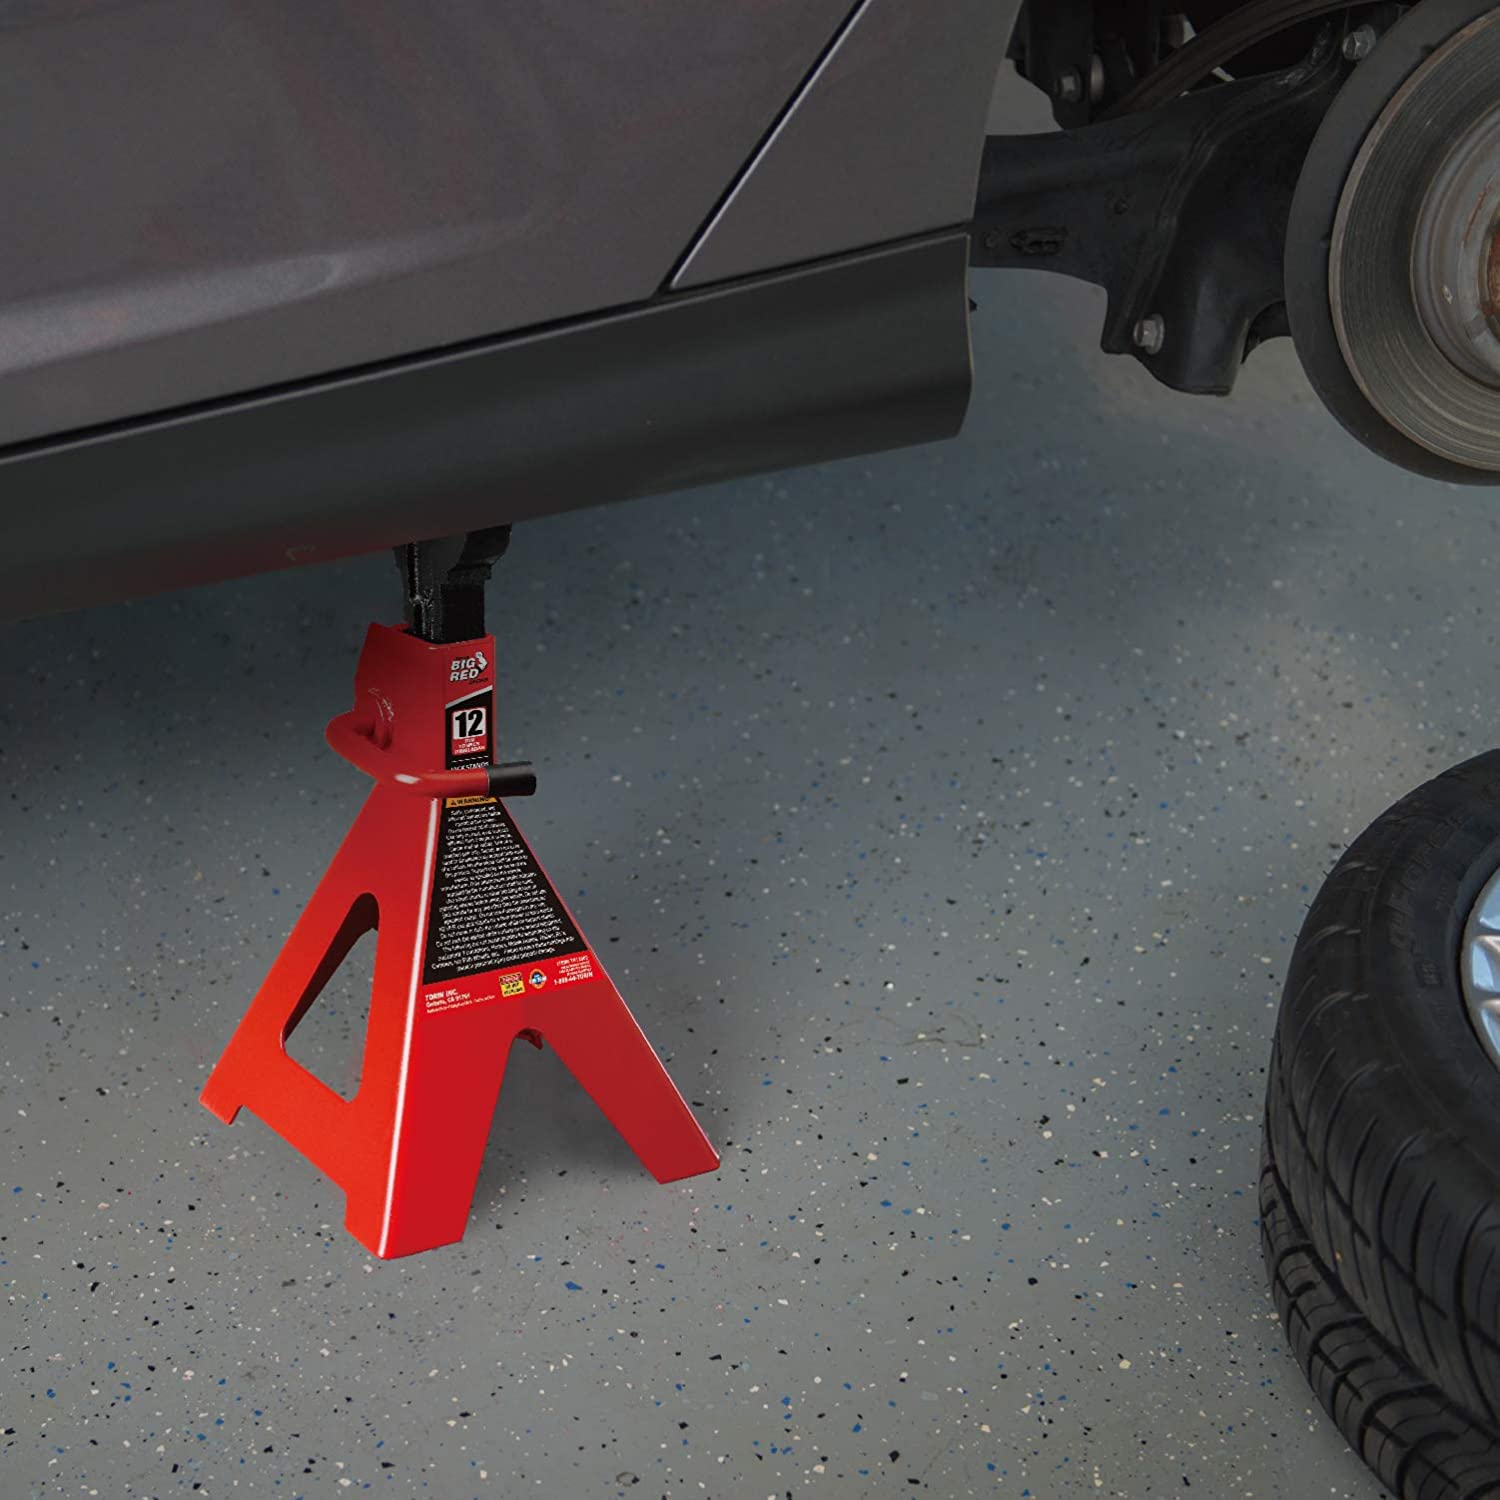 Big Red T41202 Torin Steel Jack Stand in use